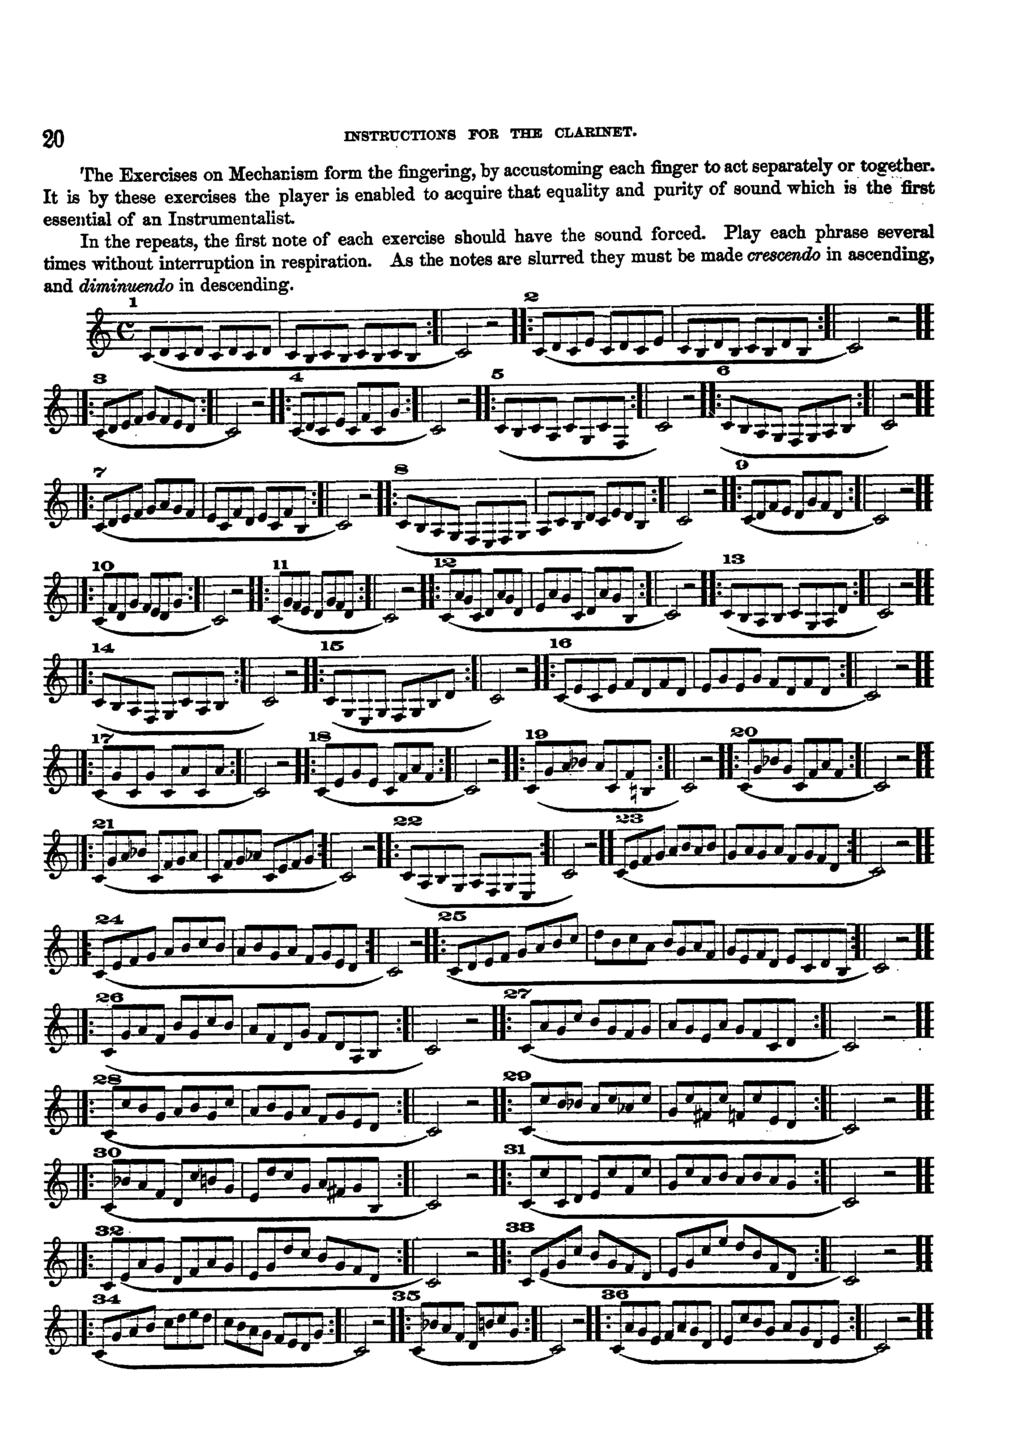 20 NSTRUCTONS FOR THE CLARNET 'rhe Exercises on Mechanism form the :fingering, by accustoming each finger to act separately or together t is by these exercises the player is enabled to acquire that